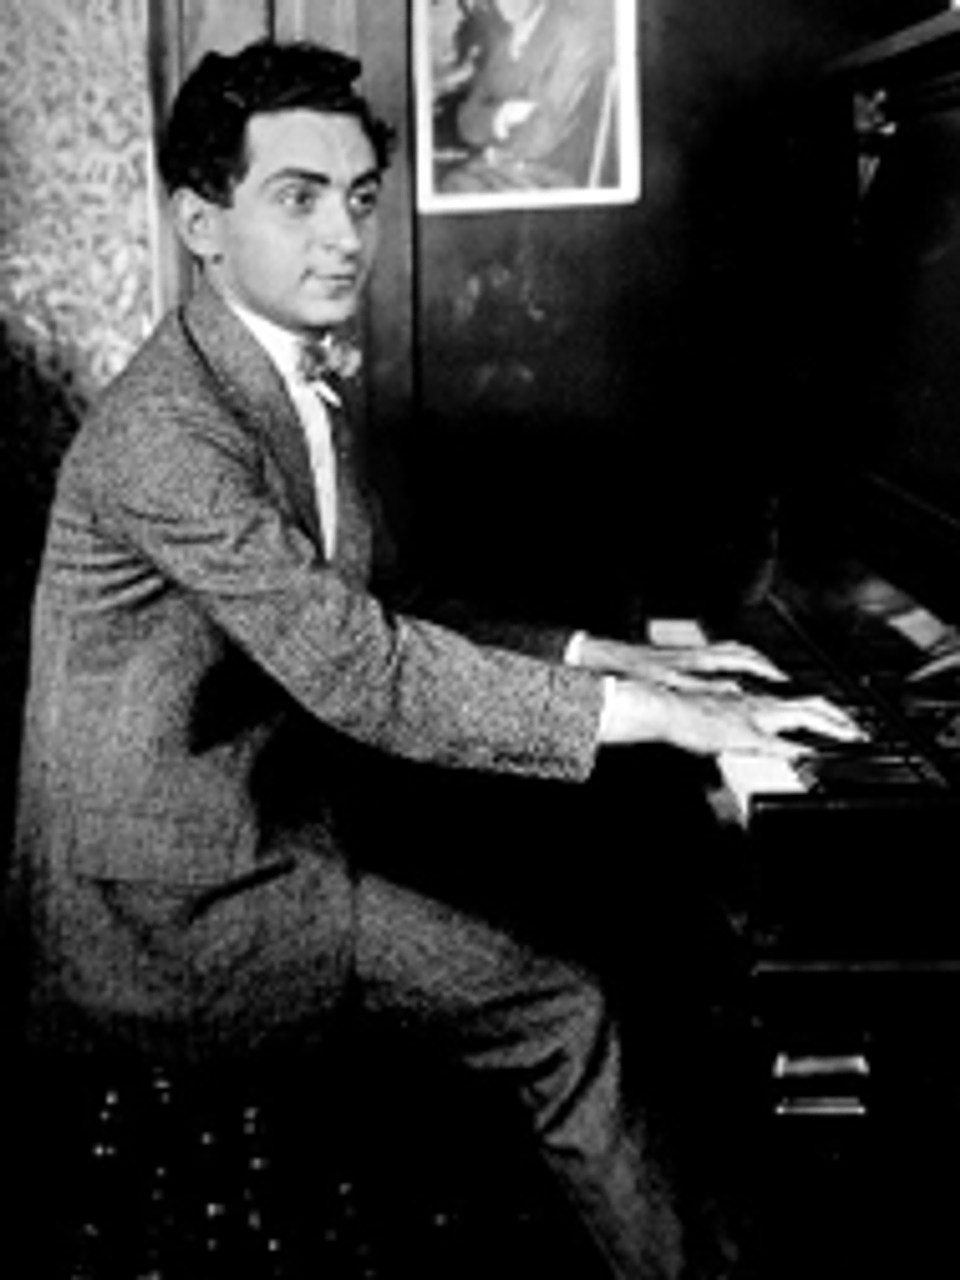 At 18 years old, Irving Berlin landed his first music publishing job with the Harry Von Tilzer Company. Courtesy of Life Magazine imaged.